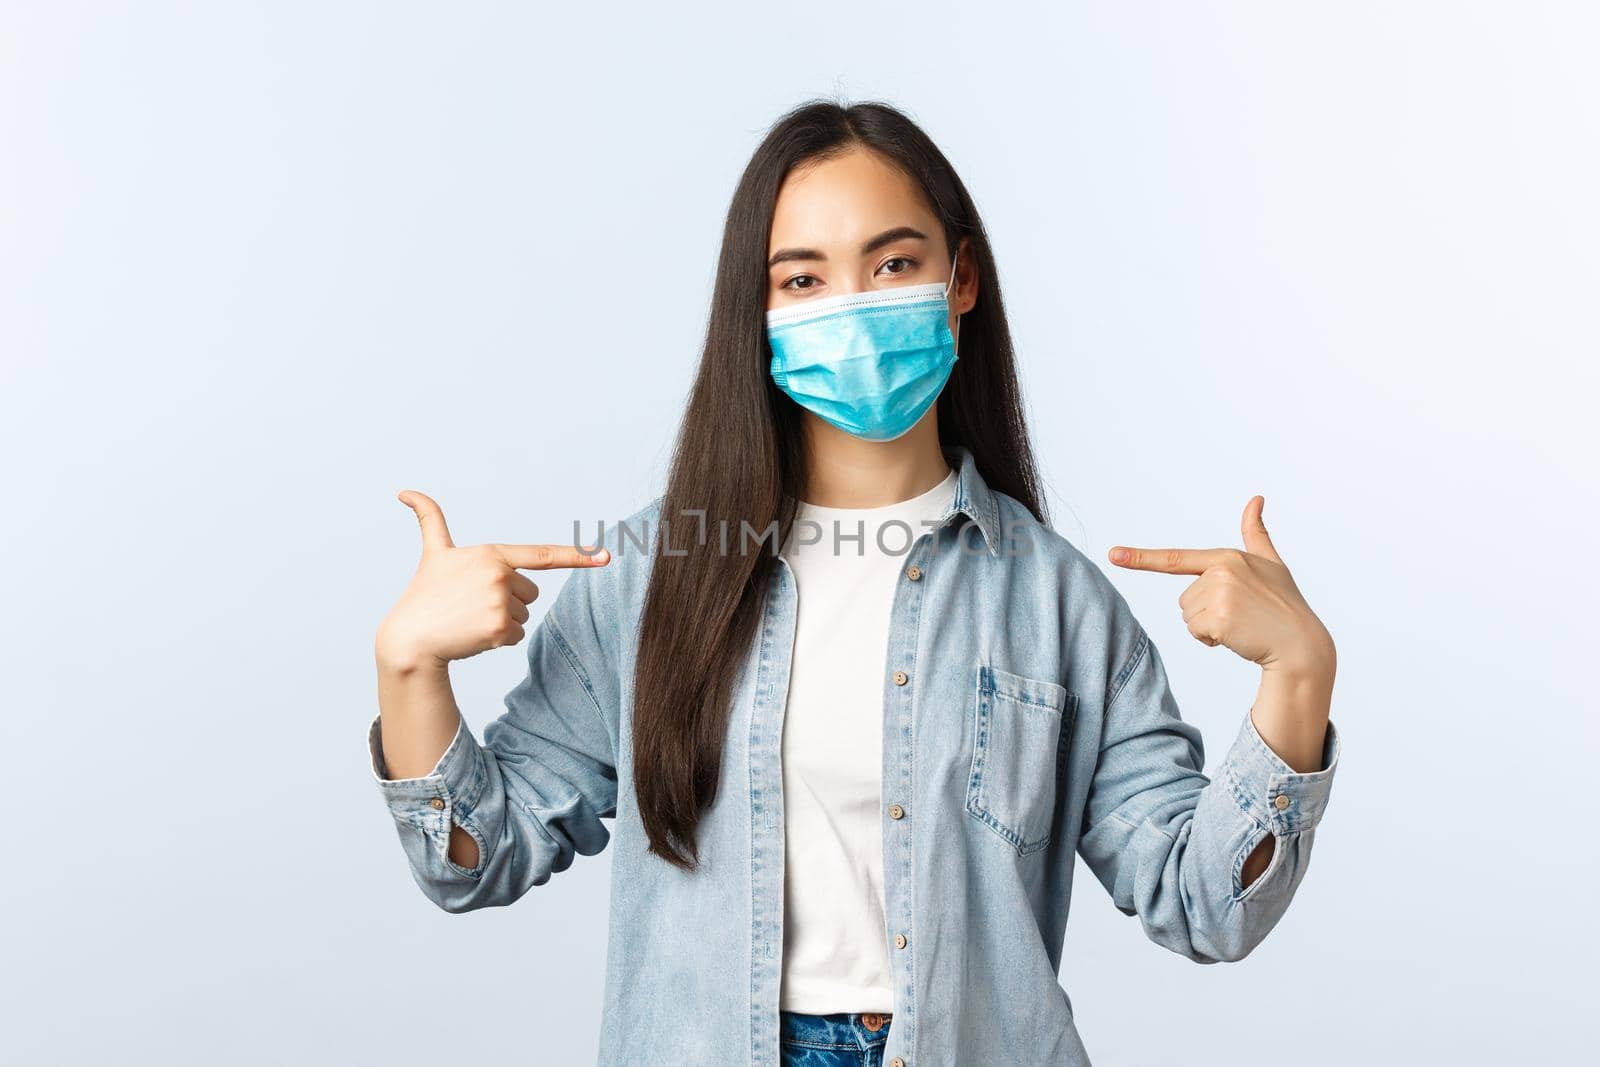 Social distancing lifestyle, covid-19 pandemic everyday life and leisure concept. Serious professional IT freelancer, female asian girl in medical mask pointing herself, promote own service.